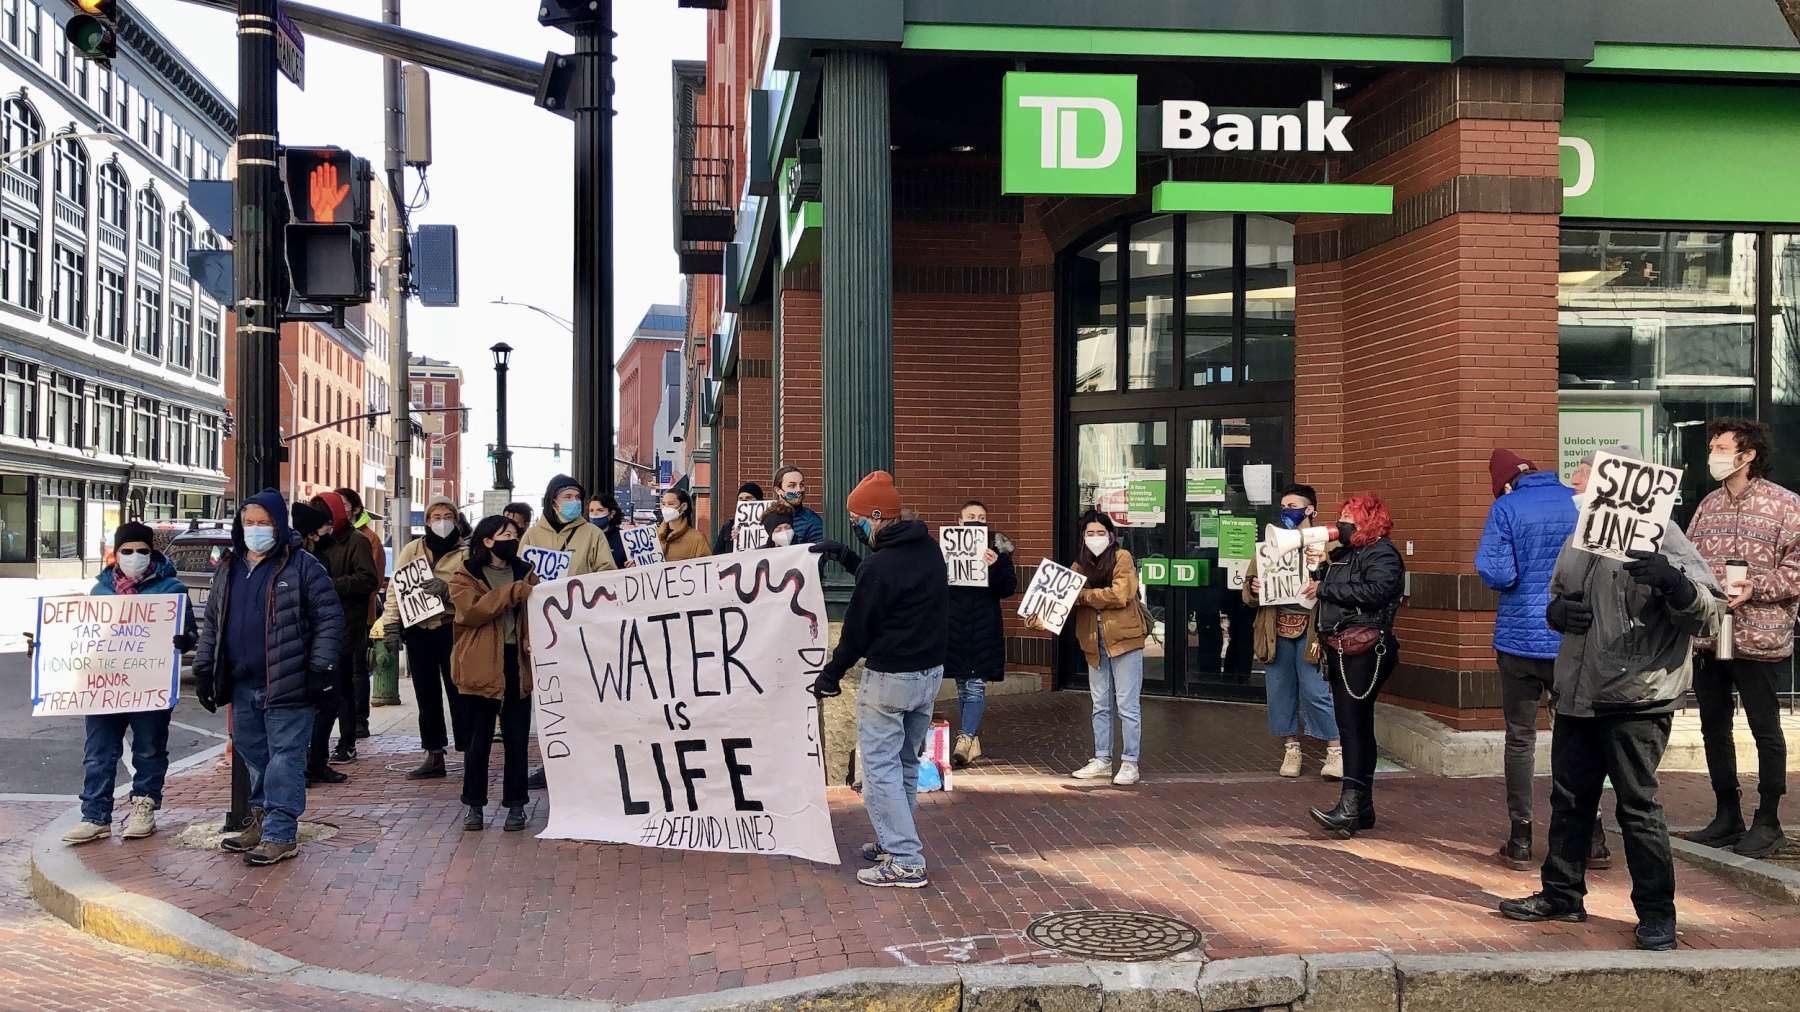 Rhode Island News: Protesters target TD Bank in Providence for continued oil pipeline investment